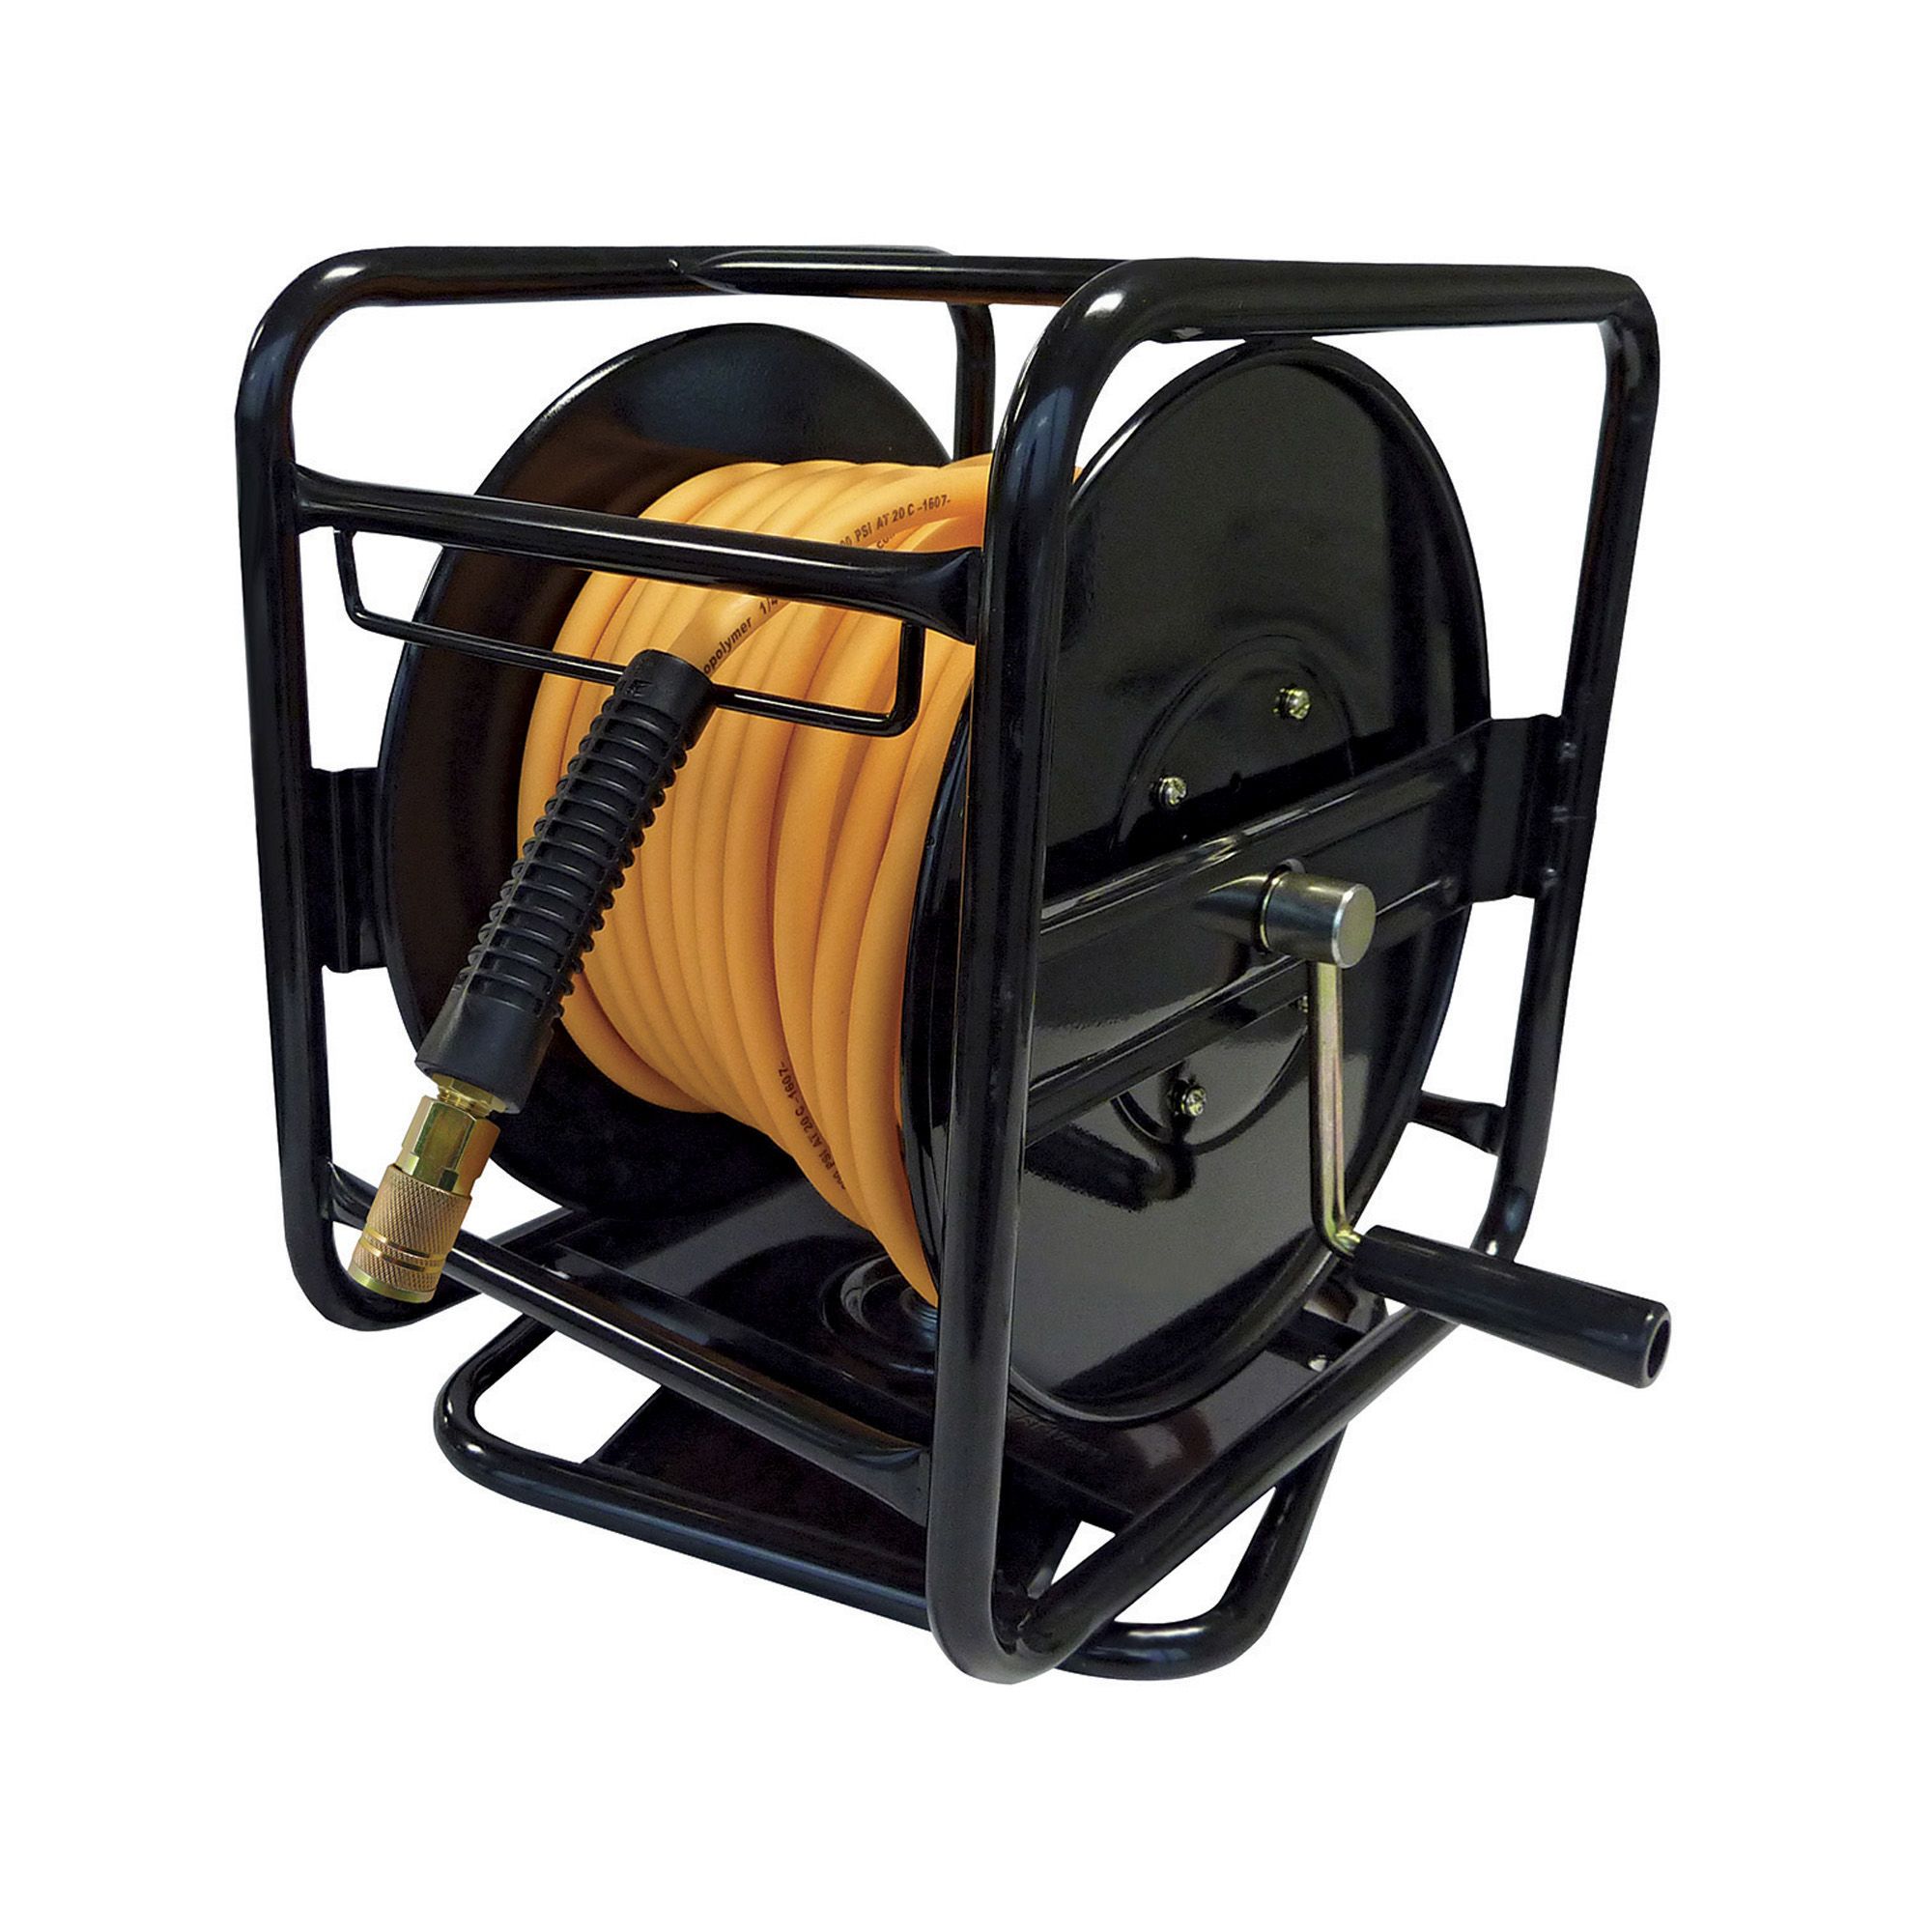 Polyreel hose reel from TOPRING